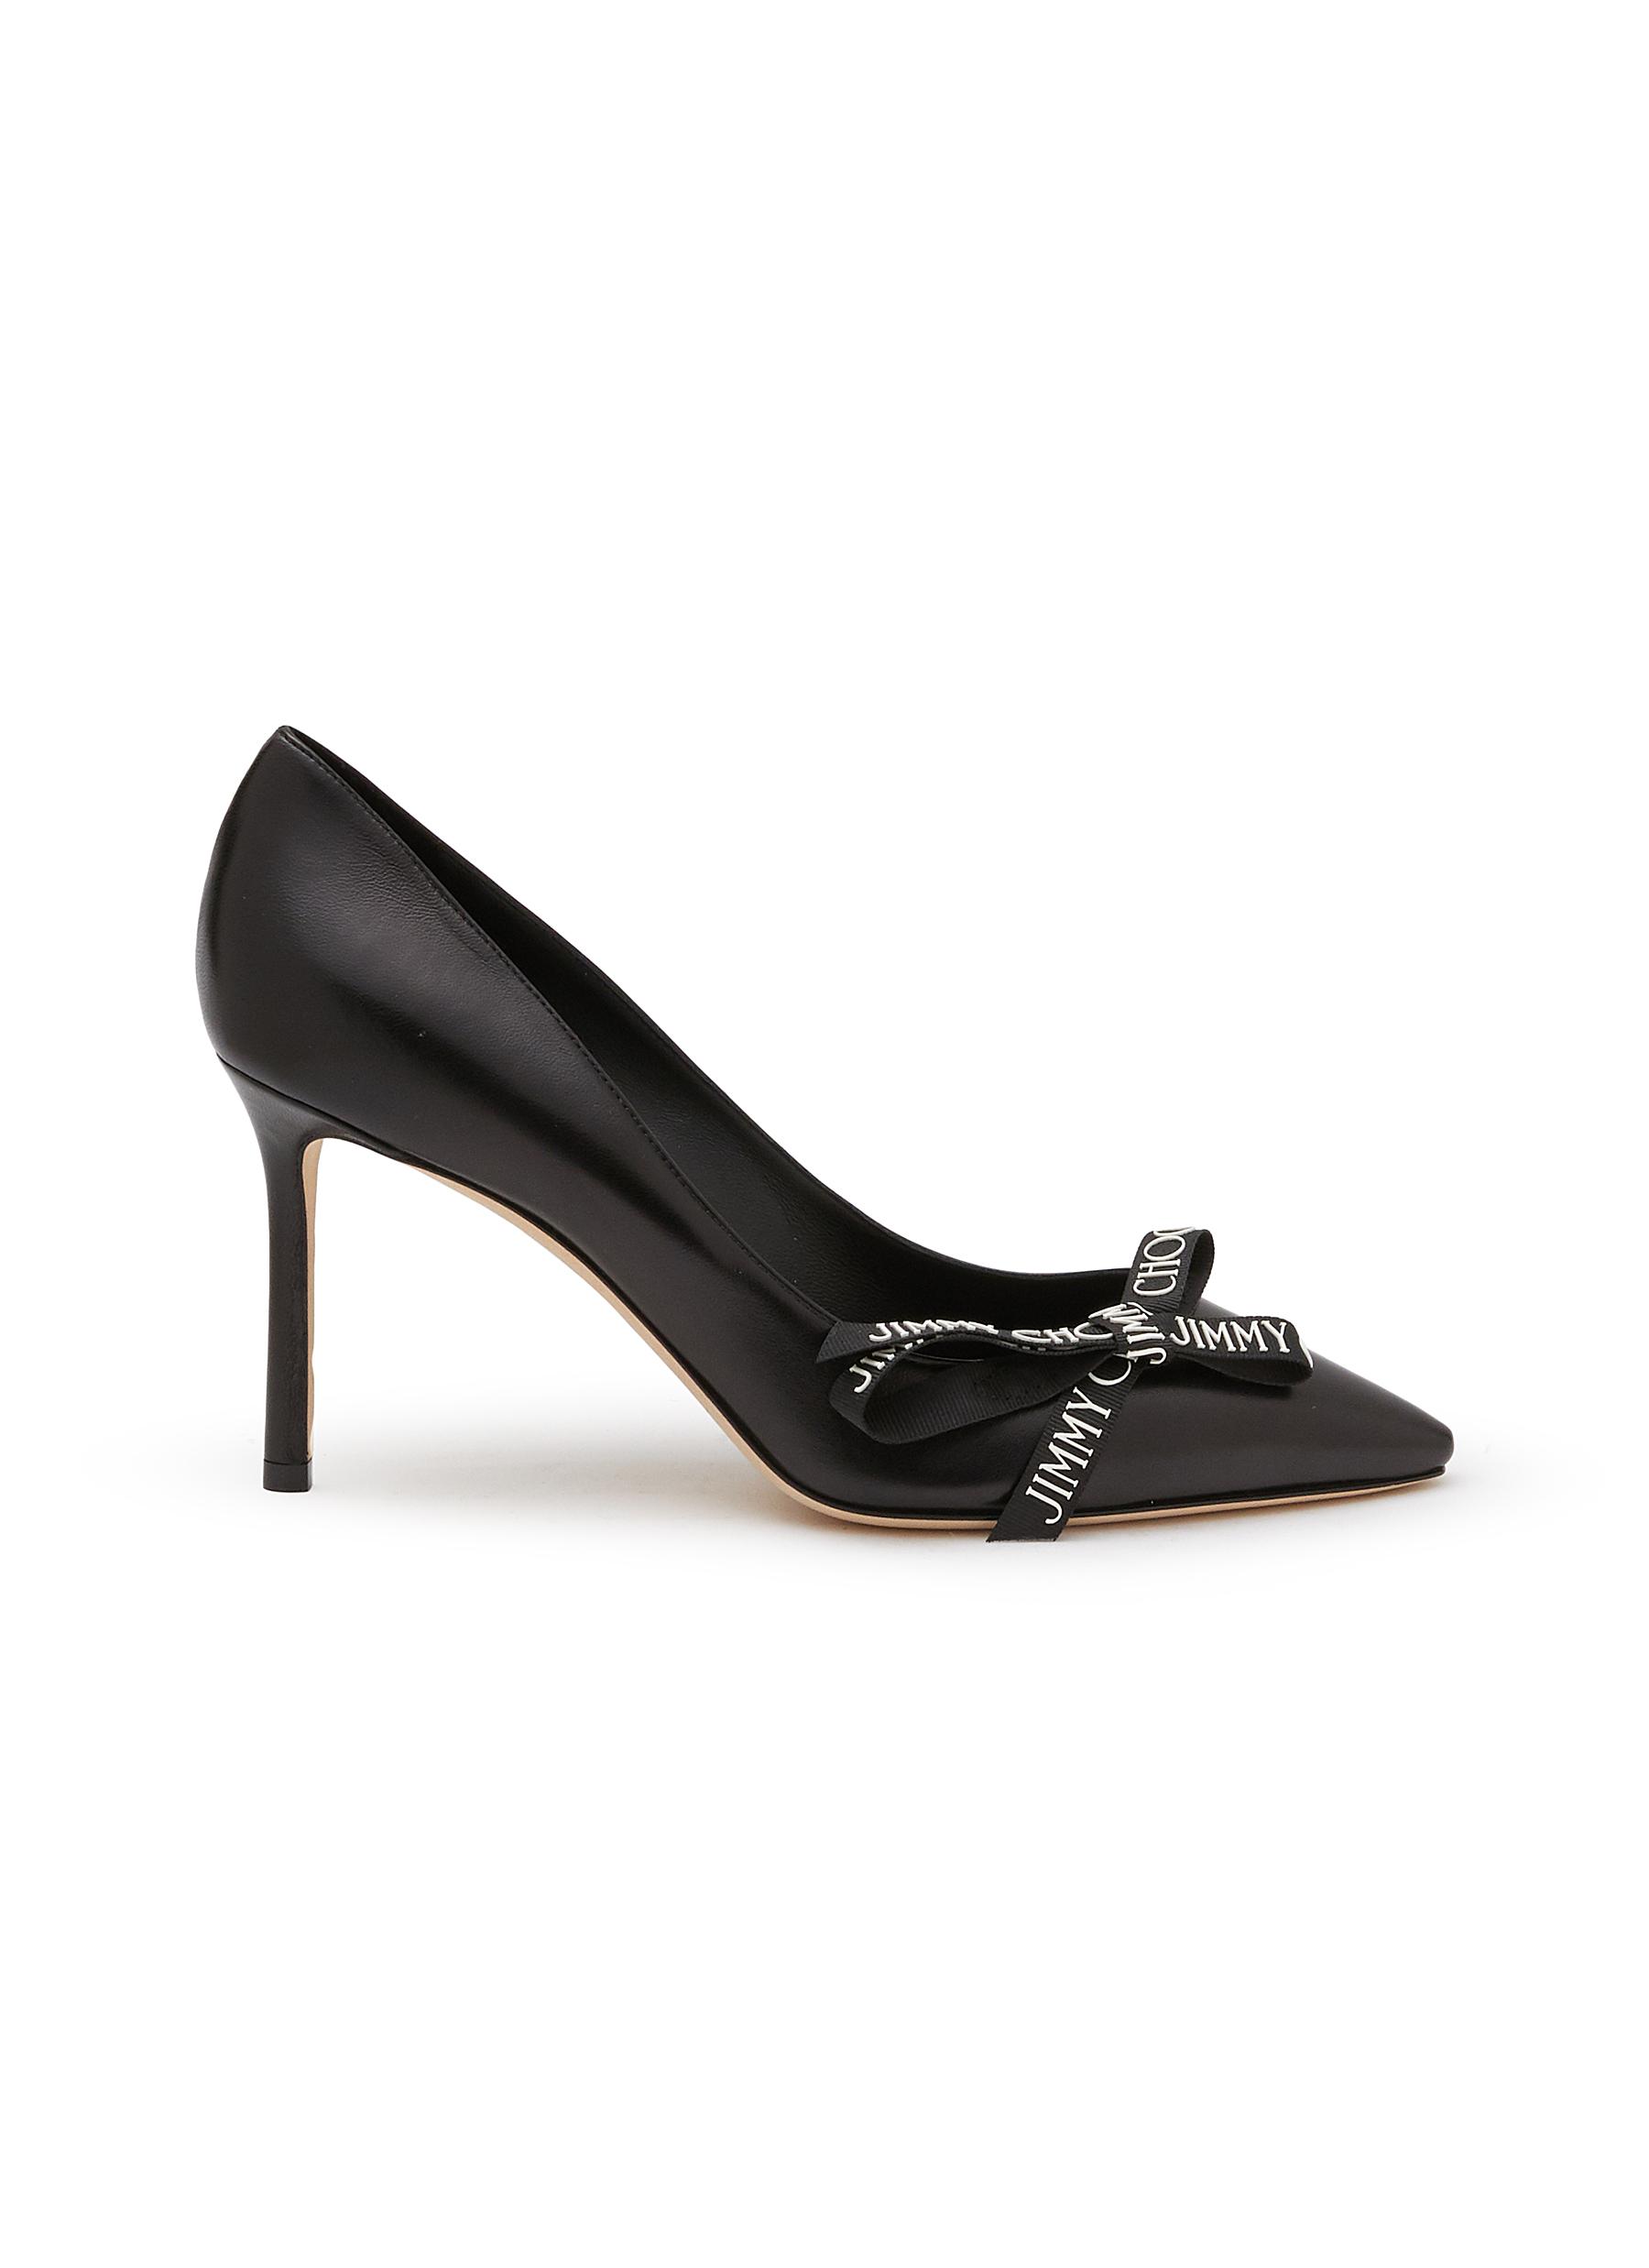 Black Patent Leather Pointy Toe Pumps, Romy 85